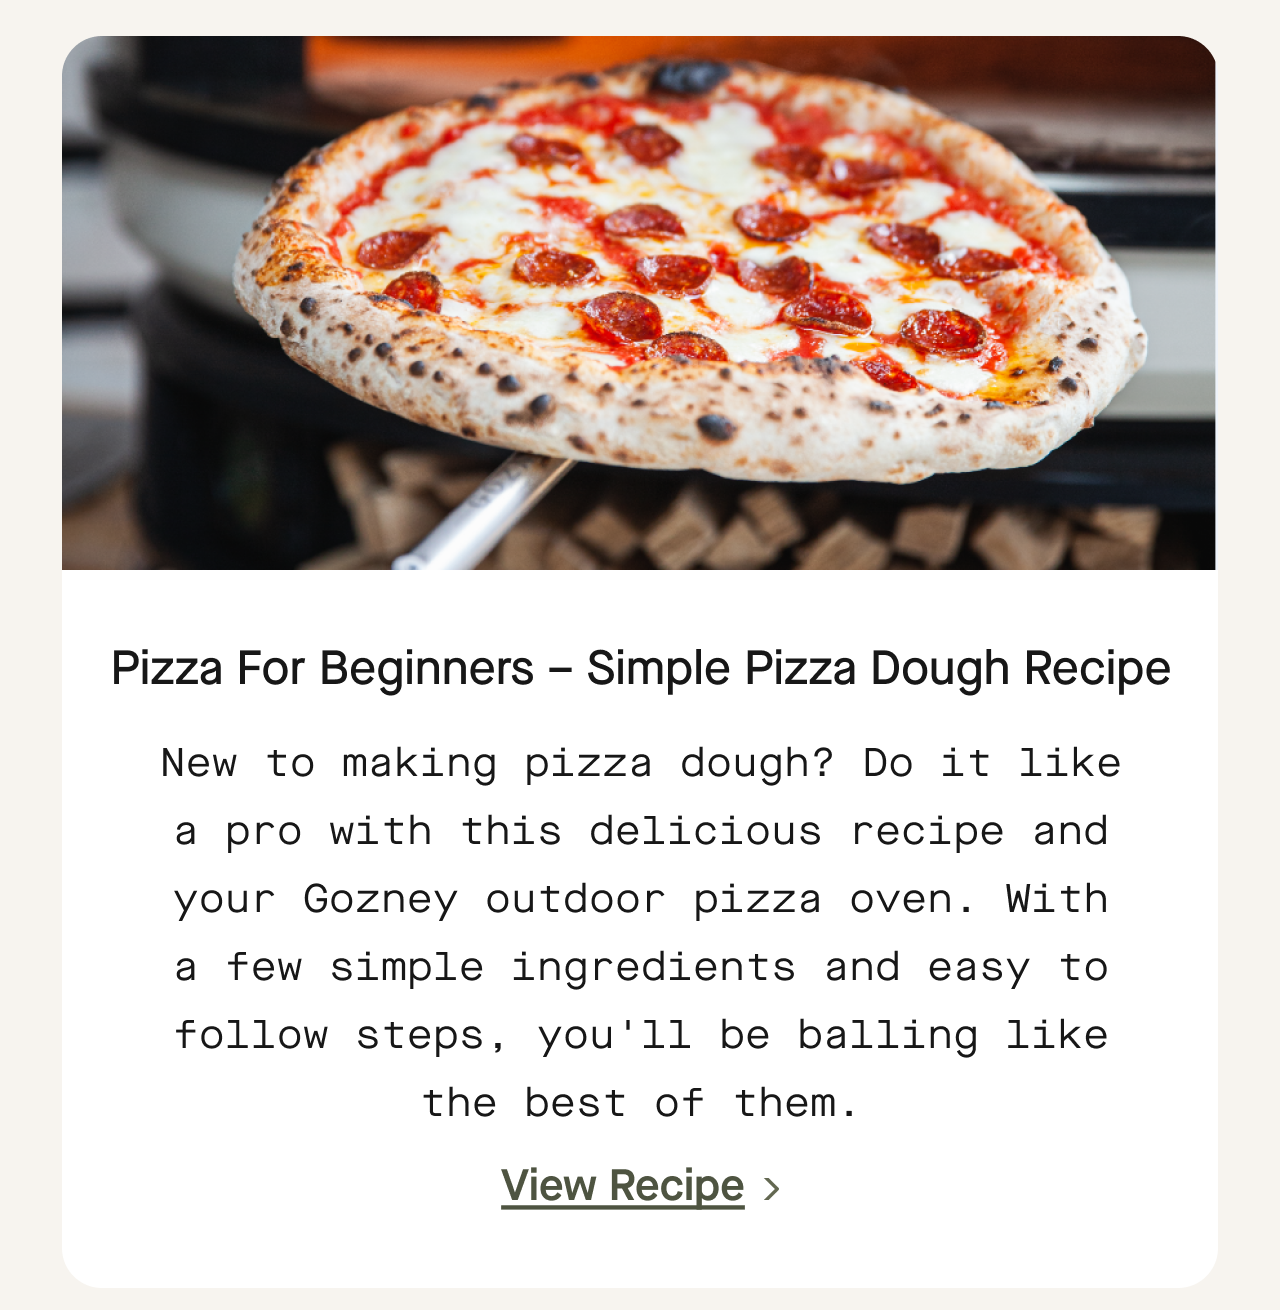 Pizza for beginners – Simple pizza dough recipe